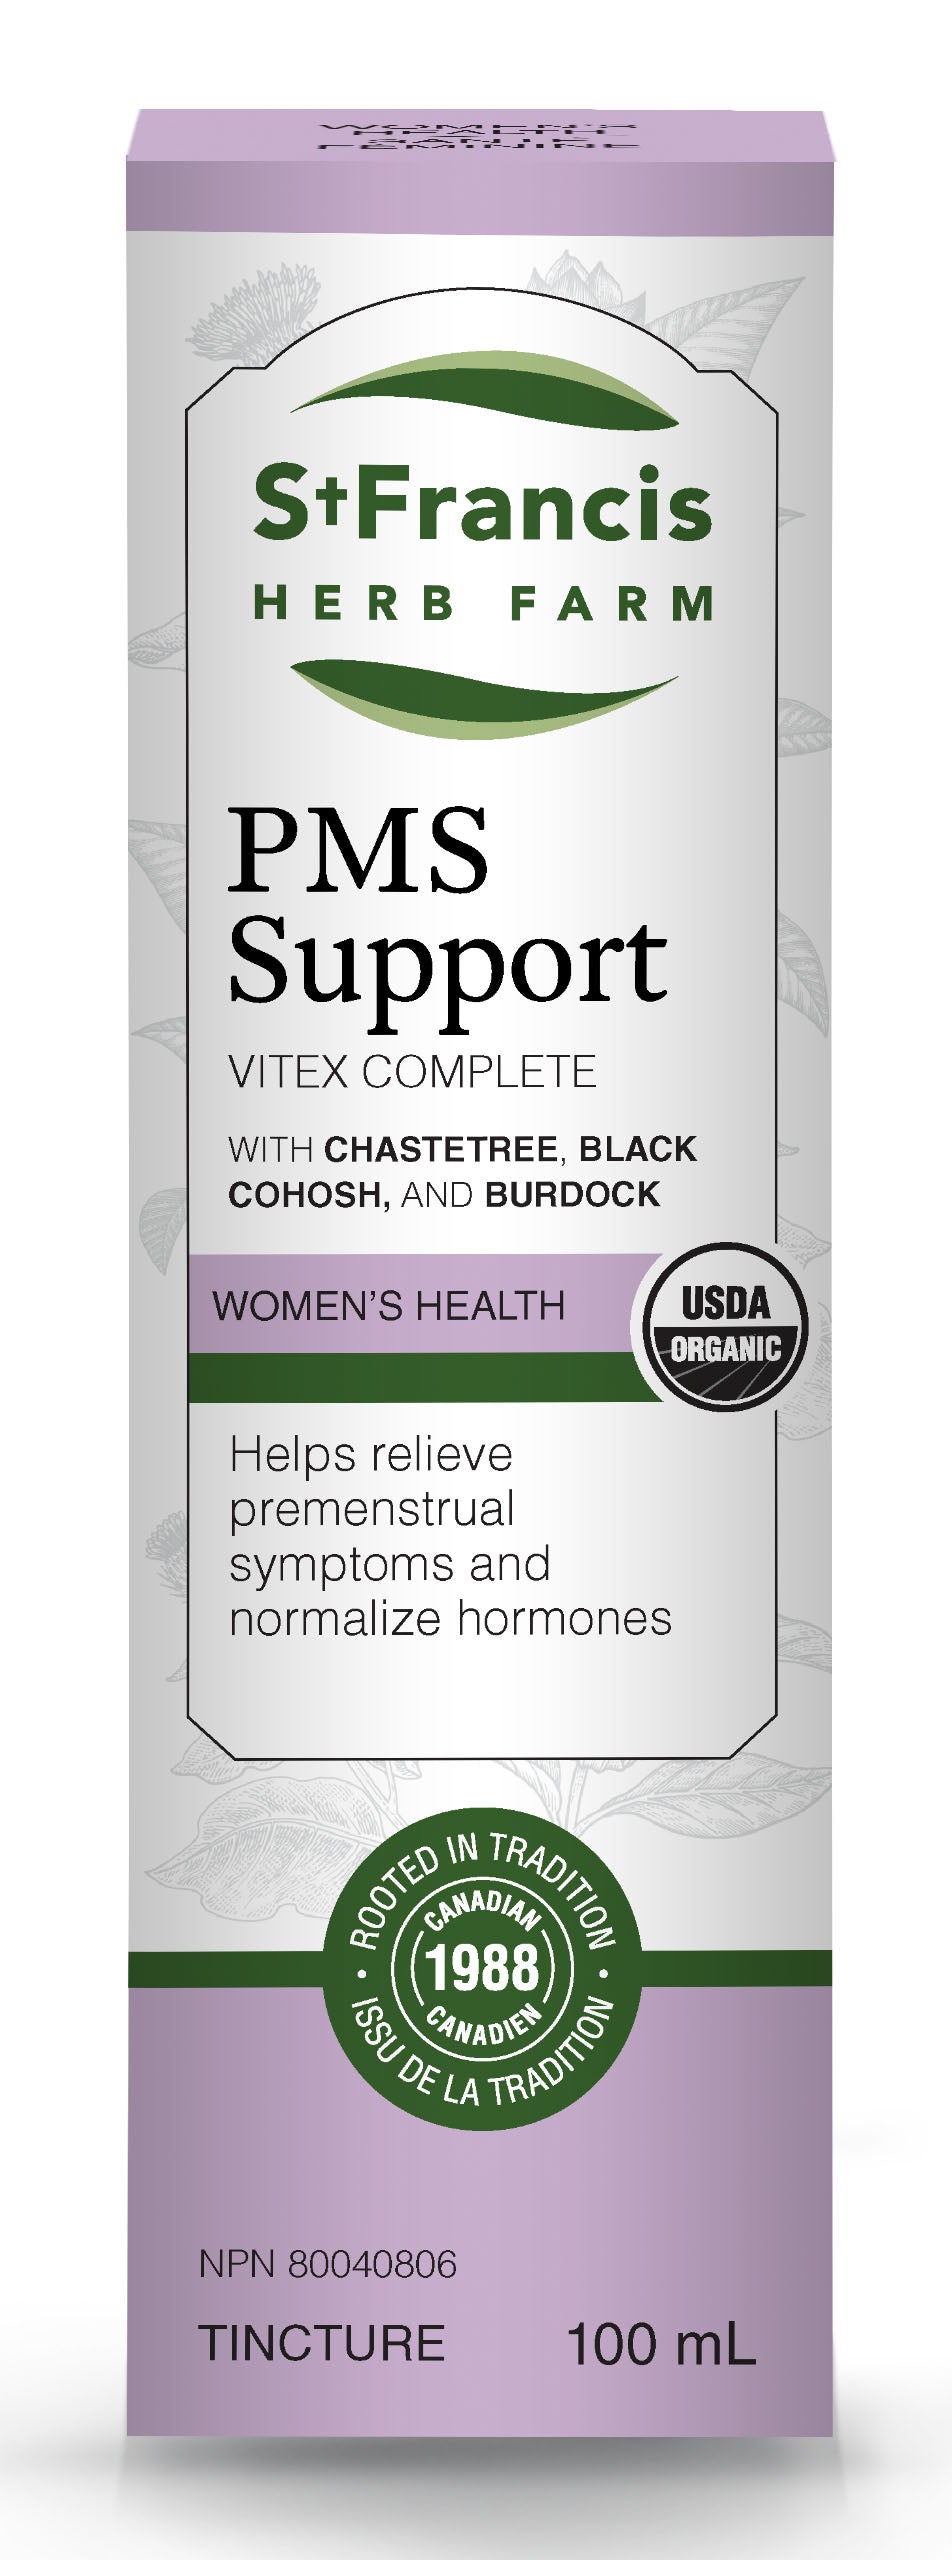 ST FRANCIS HERB FARM PMS Support ( ml